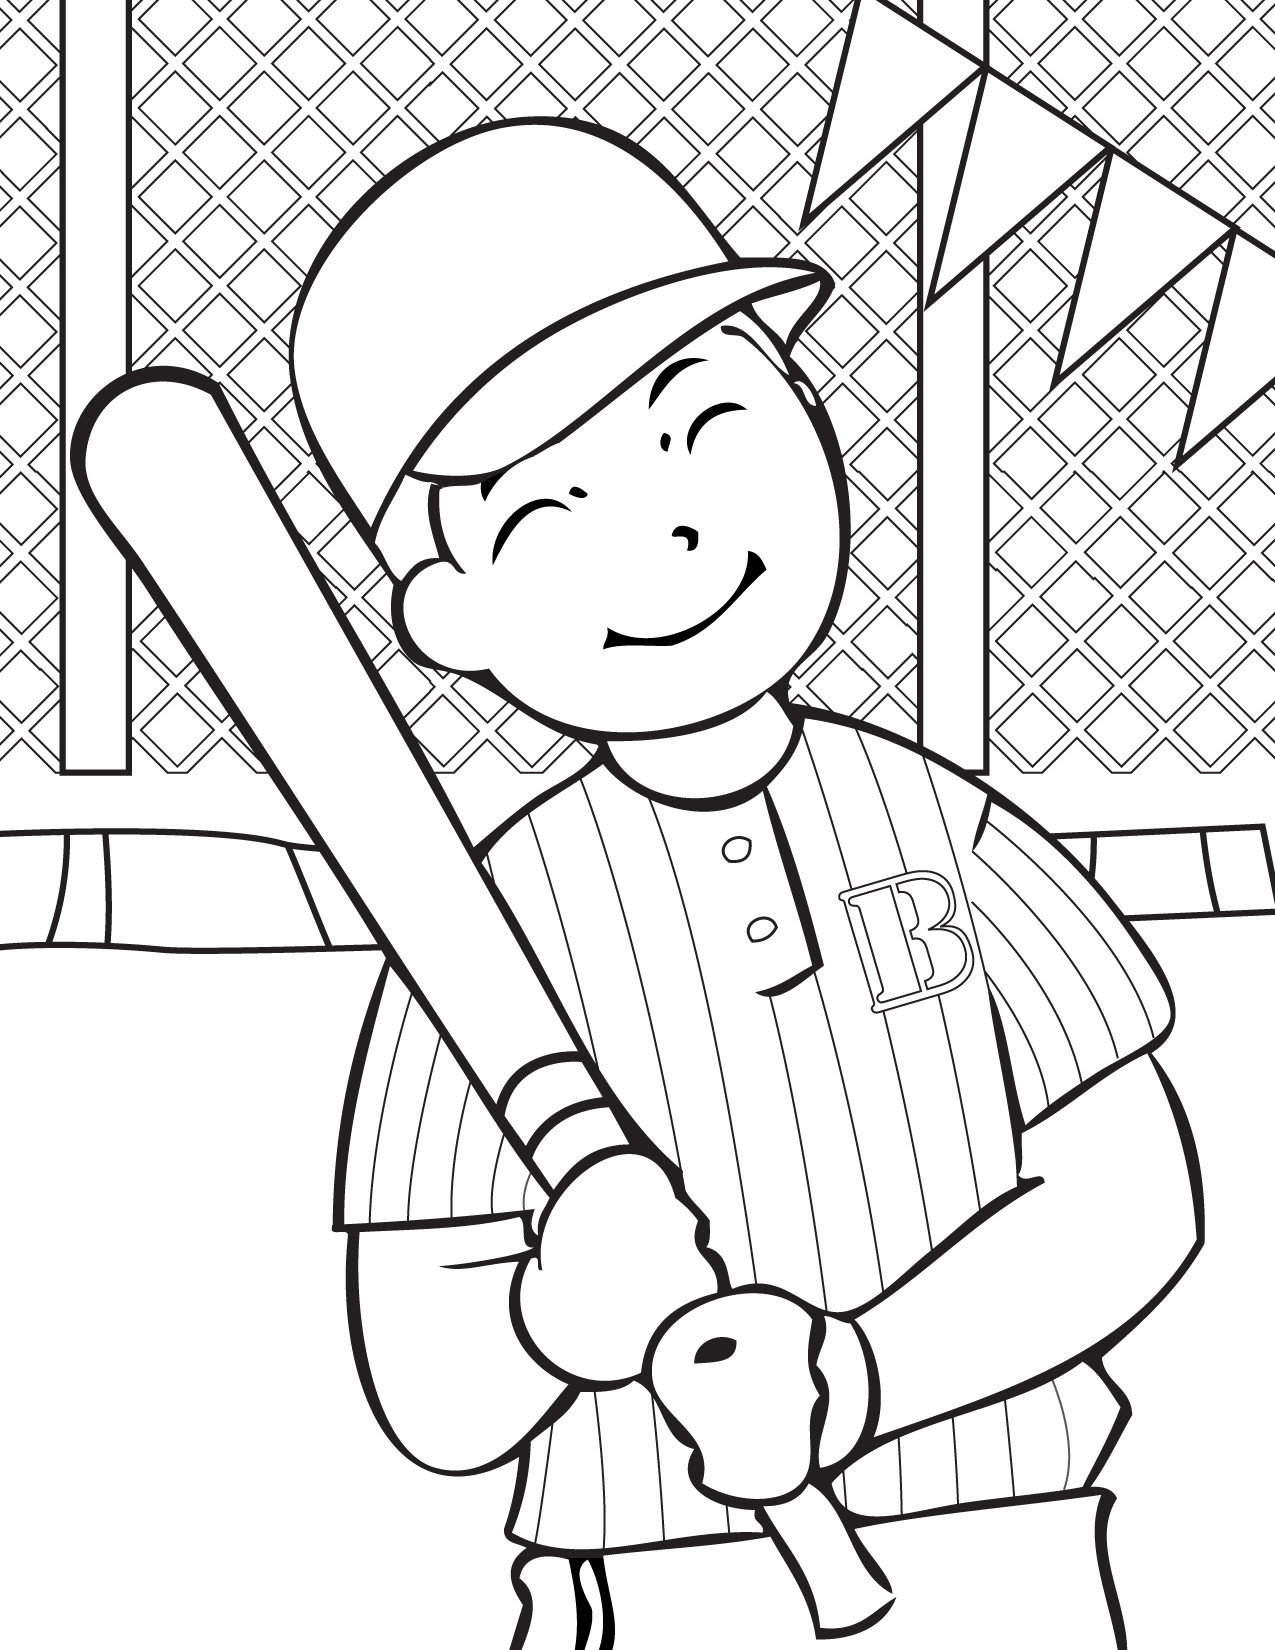 Kids Coloring Pages Free
 Free Printable Baseball Coloring Pages for Kids Best